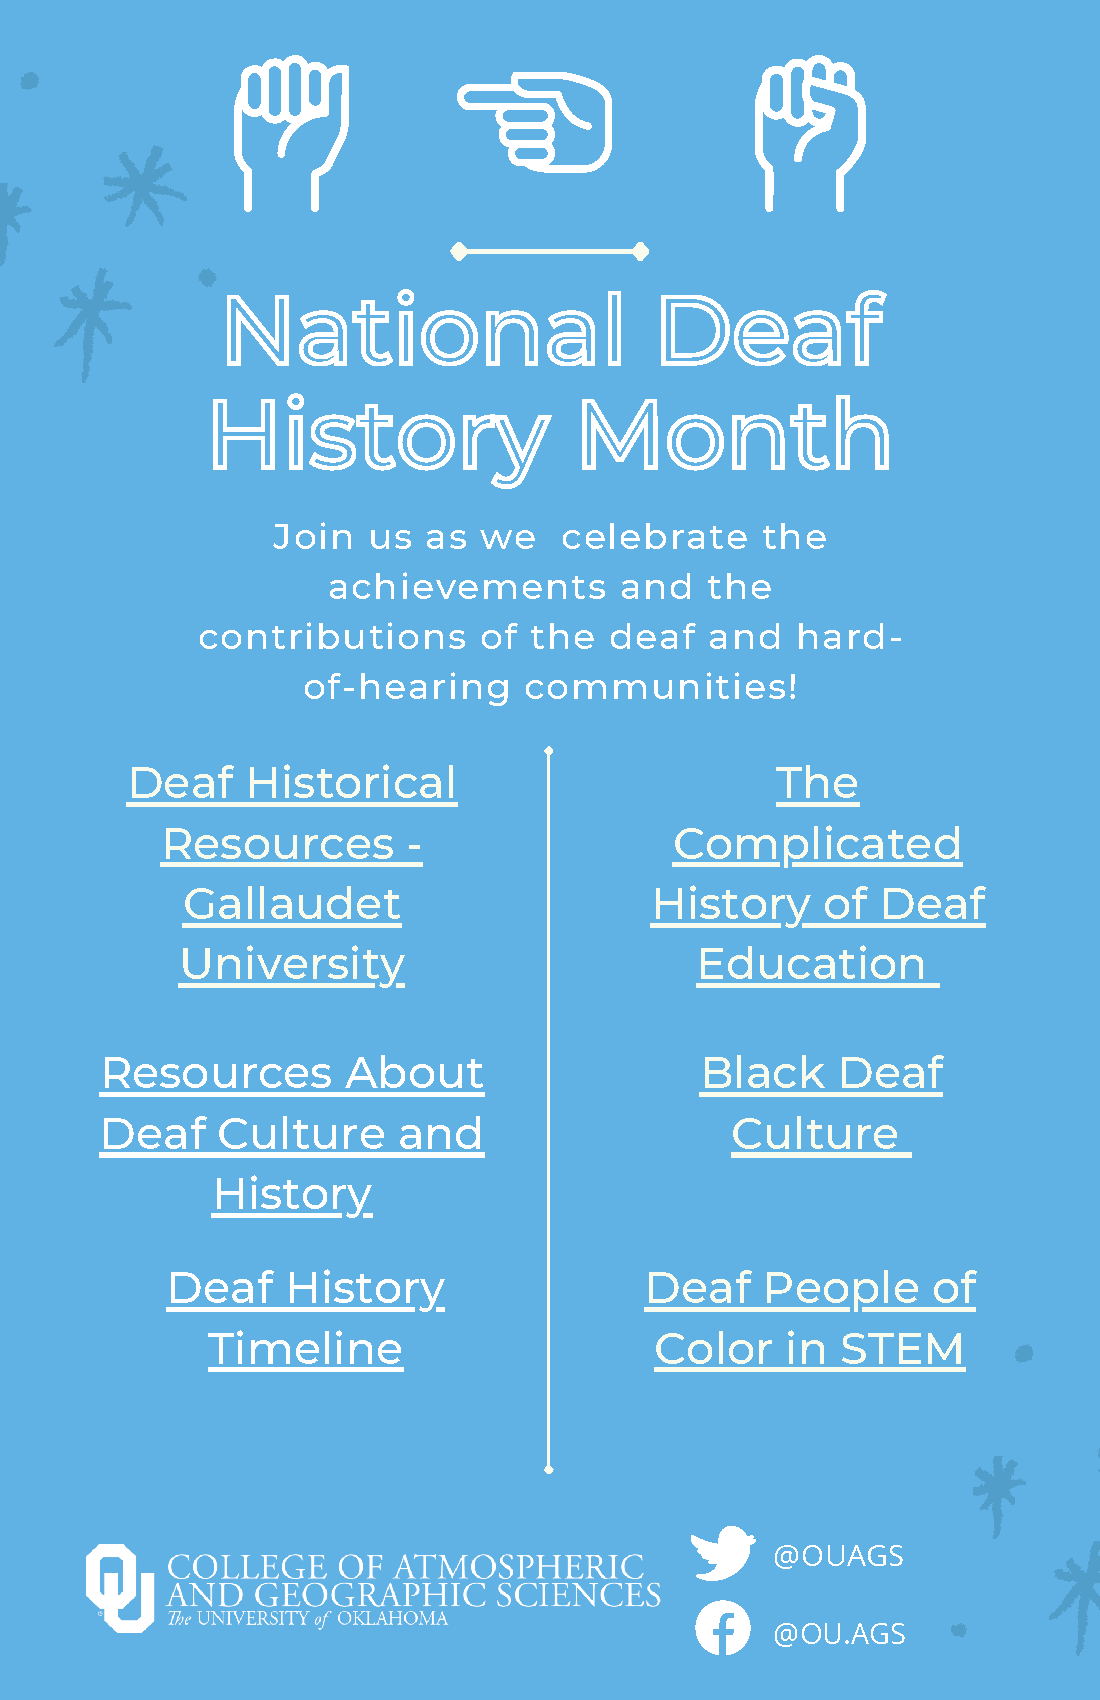 NAtional Deaf history Monthm Join us as we celebrate the achievements and the contributions of the deaf and hard-of-hearing communitiries! Deaf historical resources - Gallaudet University. The complicated histroy of deaf education. Resources about deaf culture and history. Black Deaf culture. deaf history timeline. deaf people of color in STEM. Folow the college of A&GS on twitter and facebook @OUAGS and OU.AGS